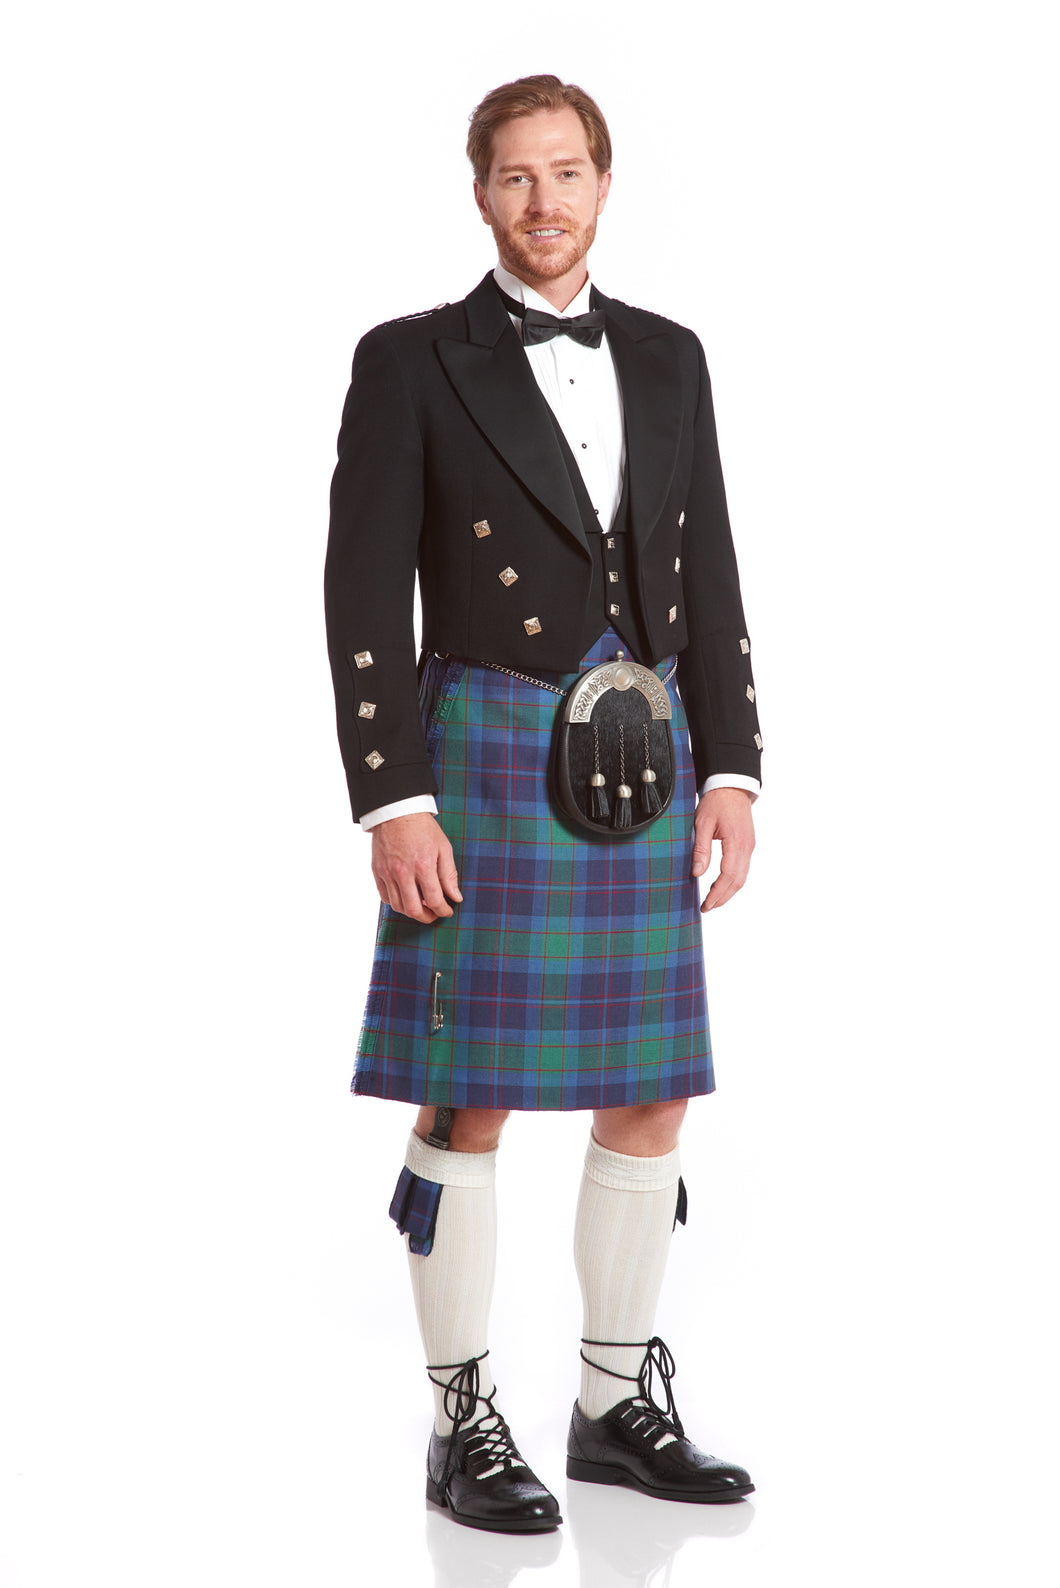 Prince Charlie Deluxe Kilt Package – The Scottish Company